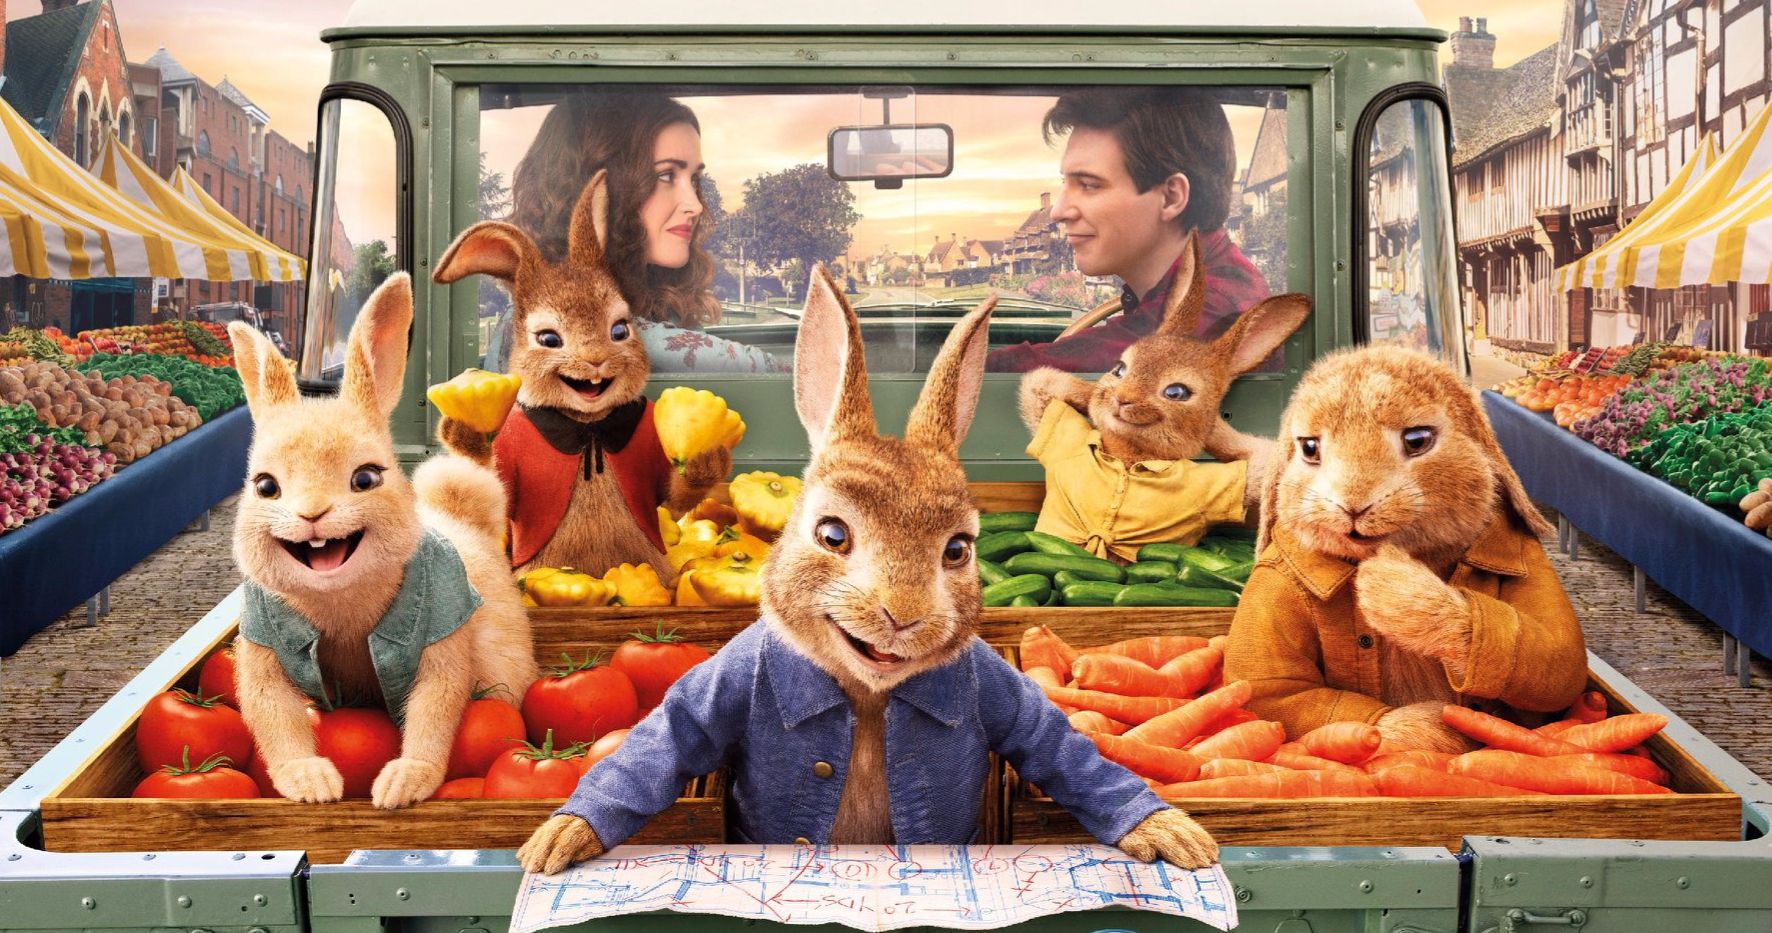 Peter Rabbit 2: The Runaway Trailer #2 Comes Hopping Down The Bunny Trail